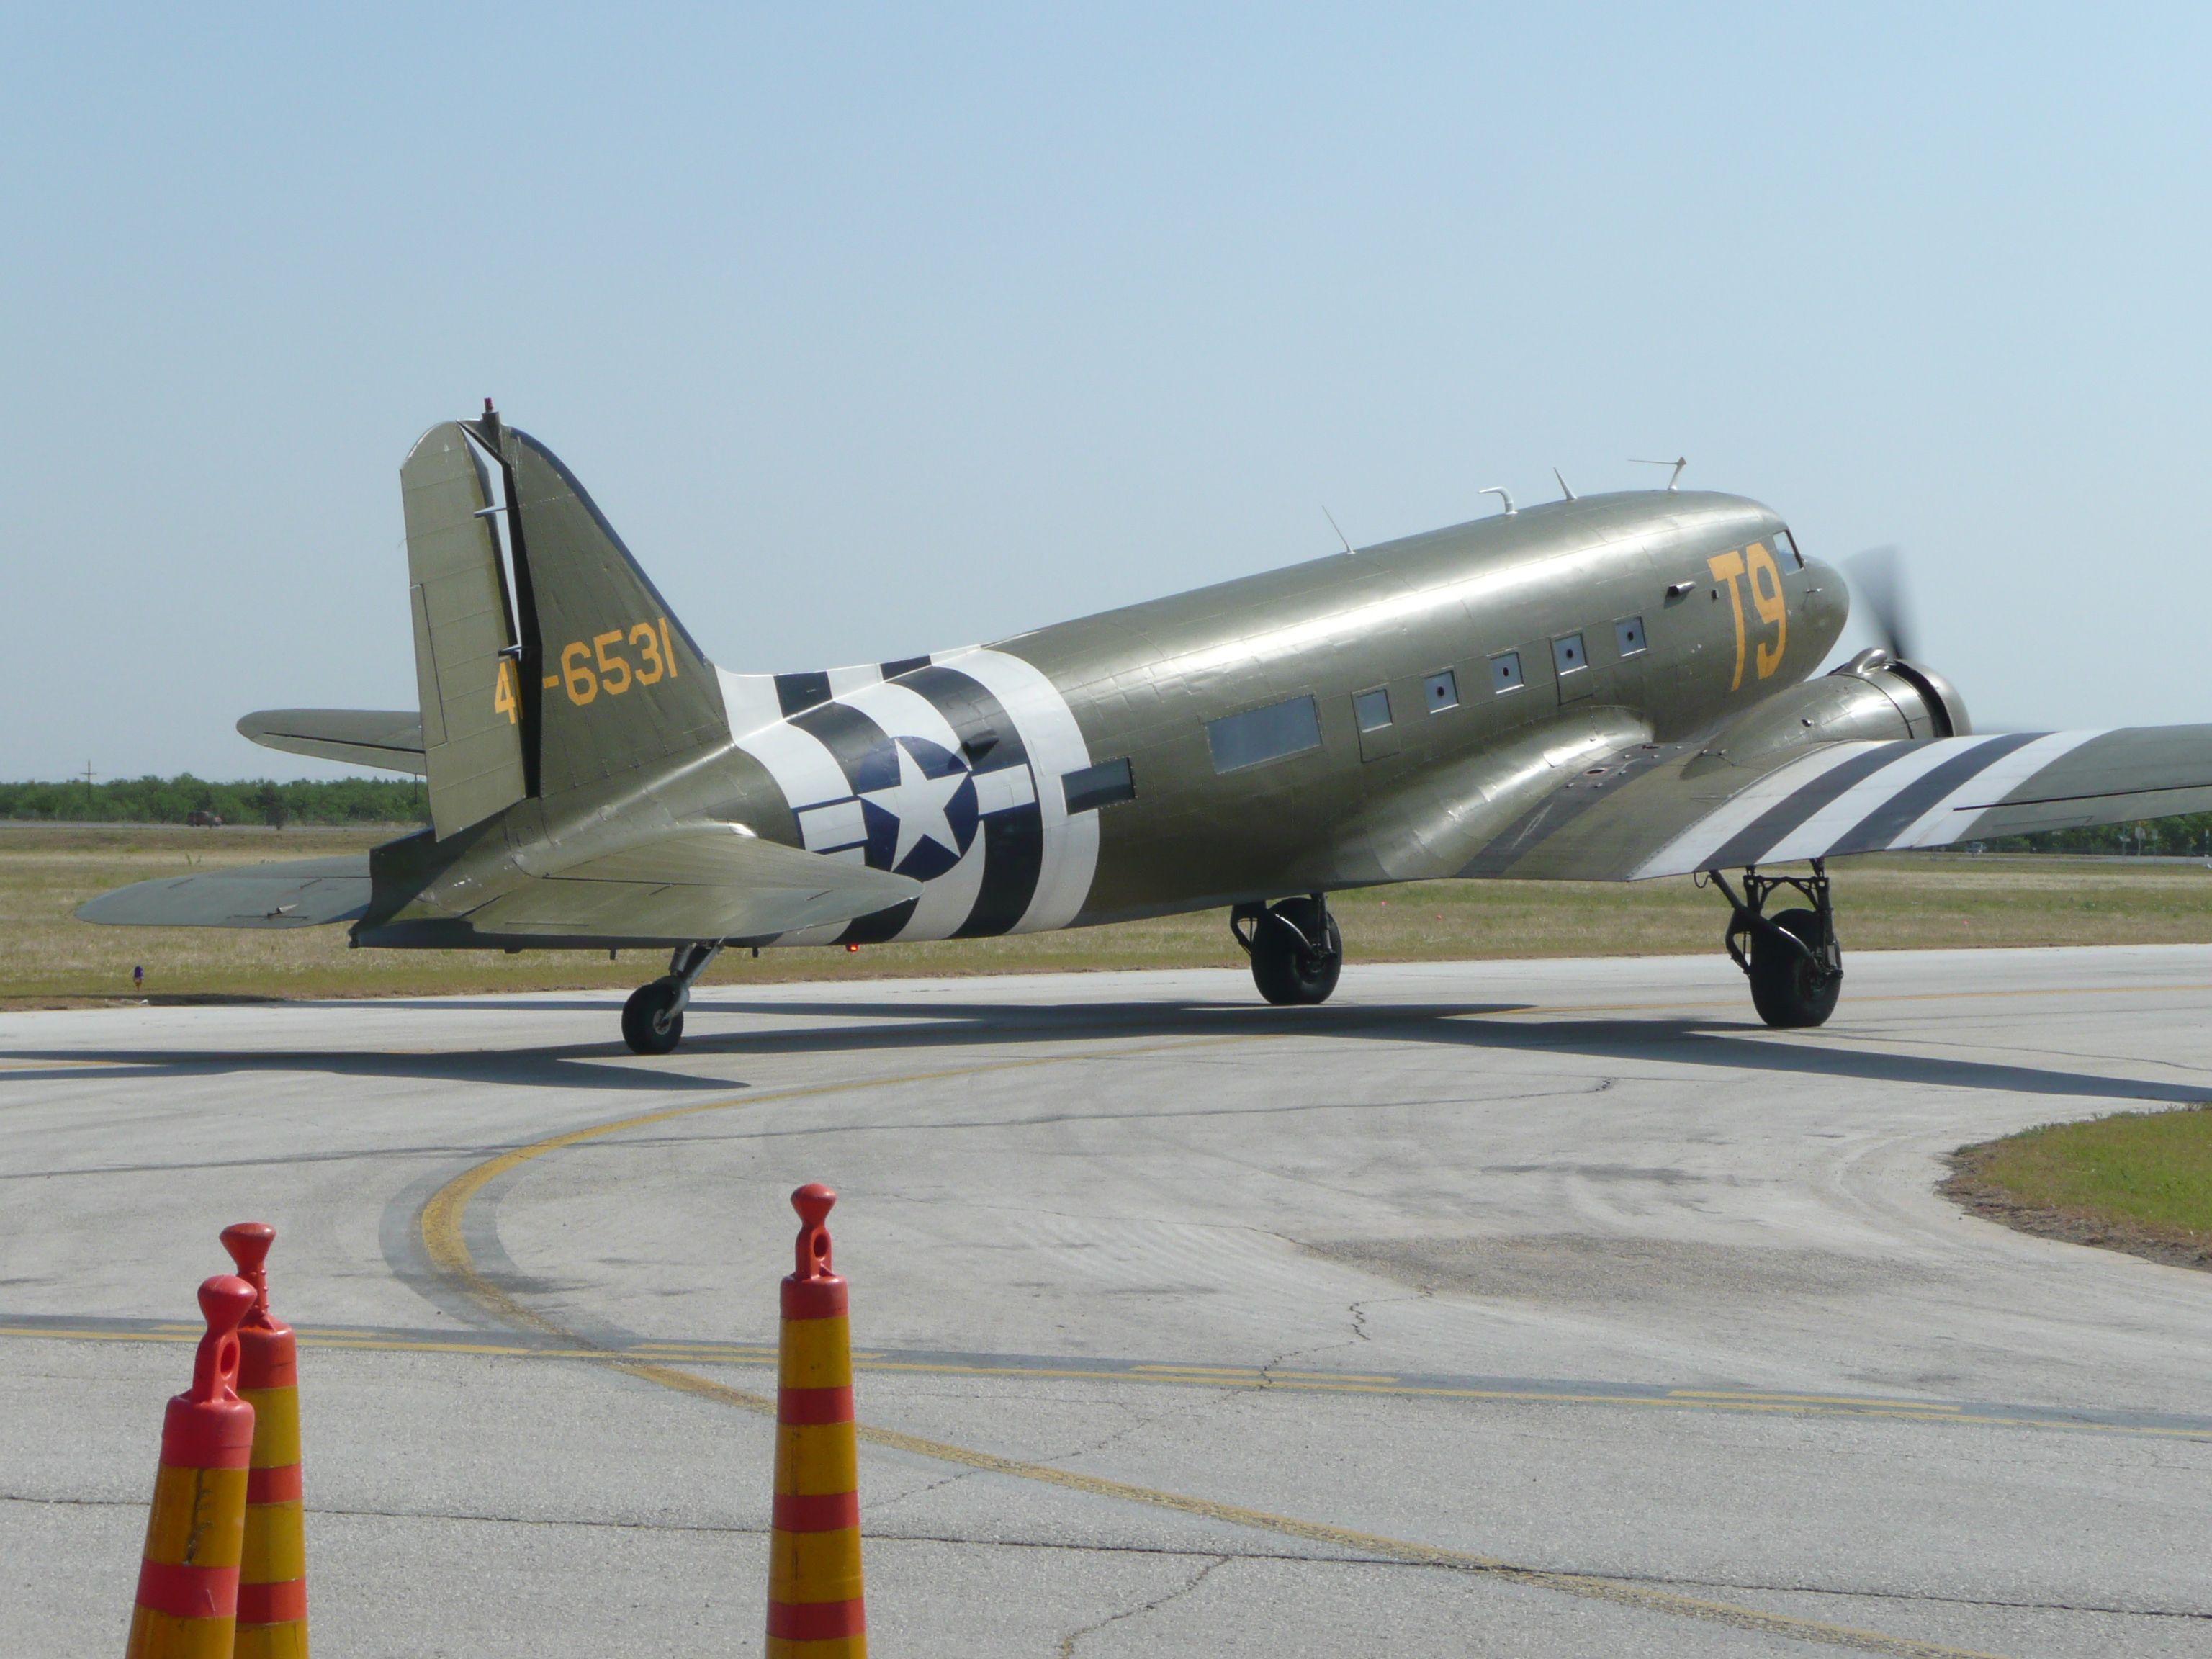 Douglas DC-3 (N87745) - DC-3 taxiing out during air show at Abilene Regional Airport, April 30, 2011.